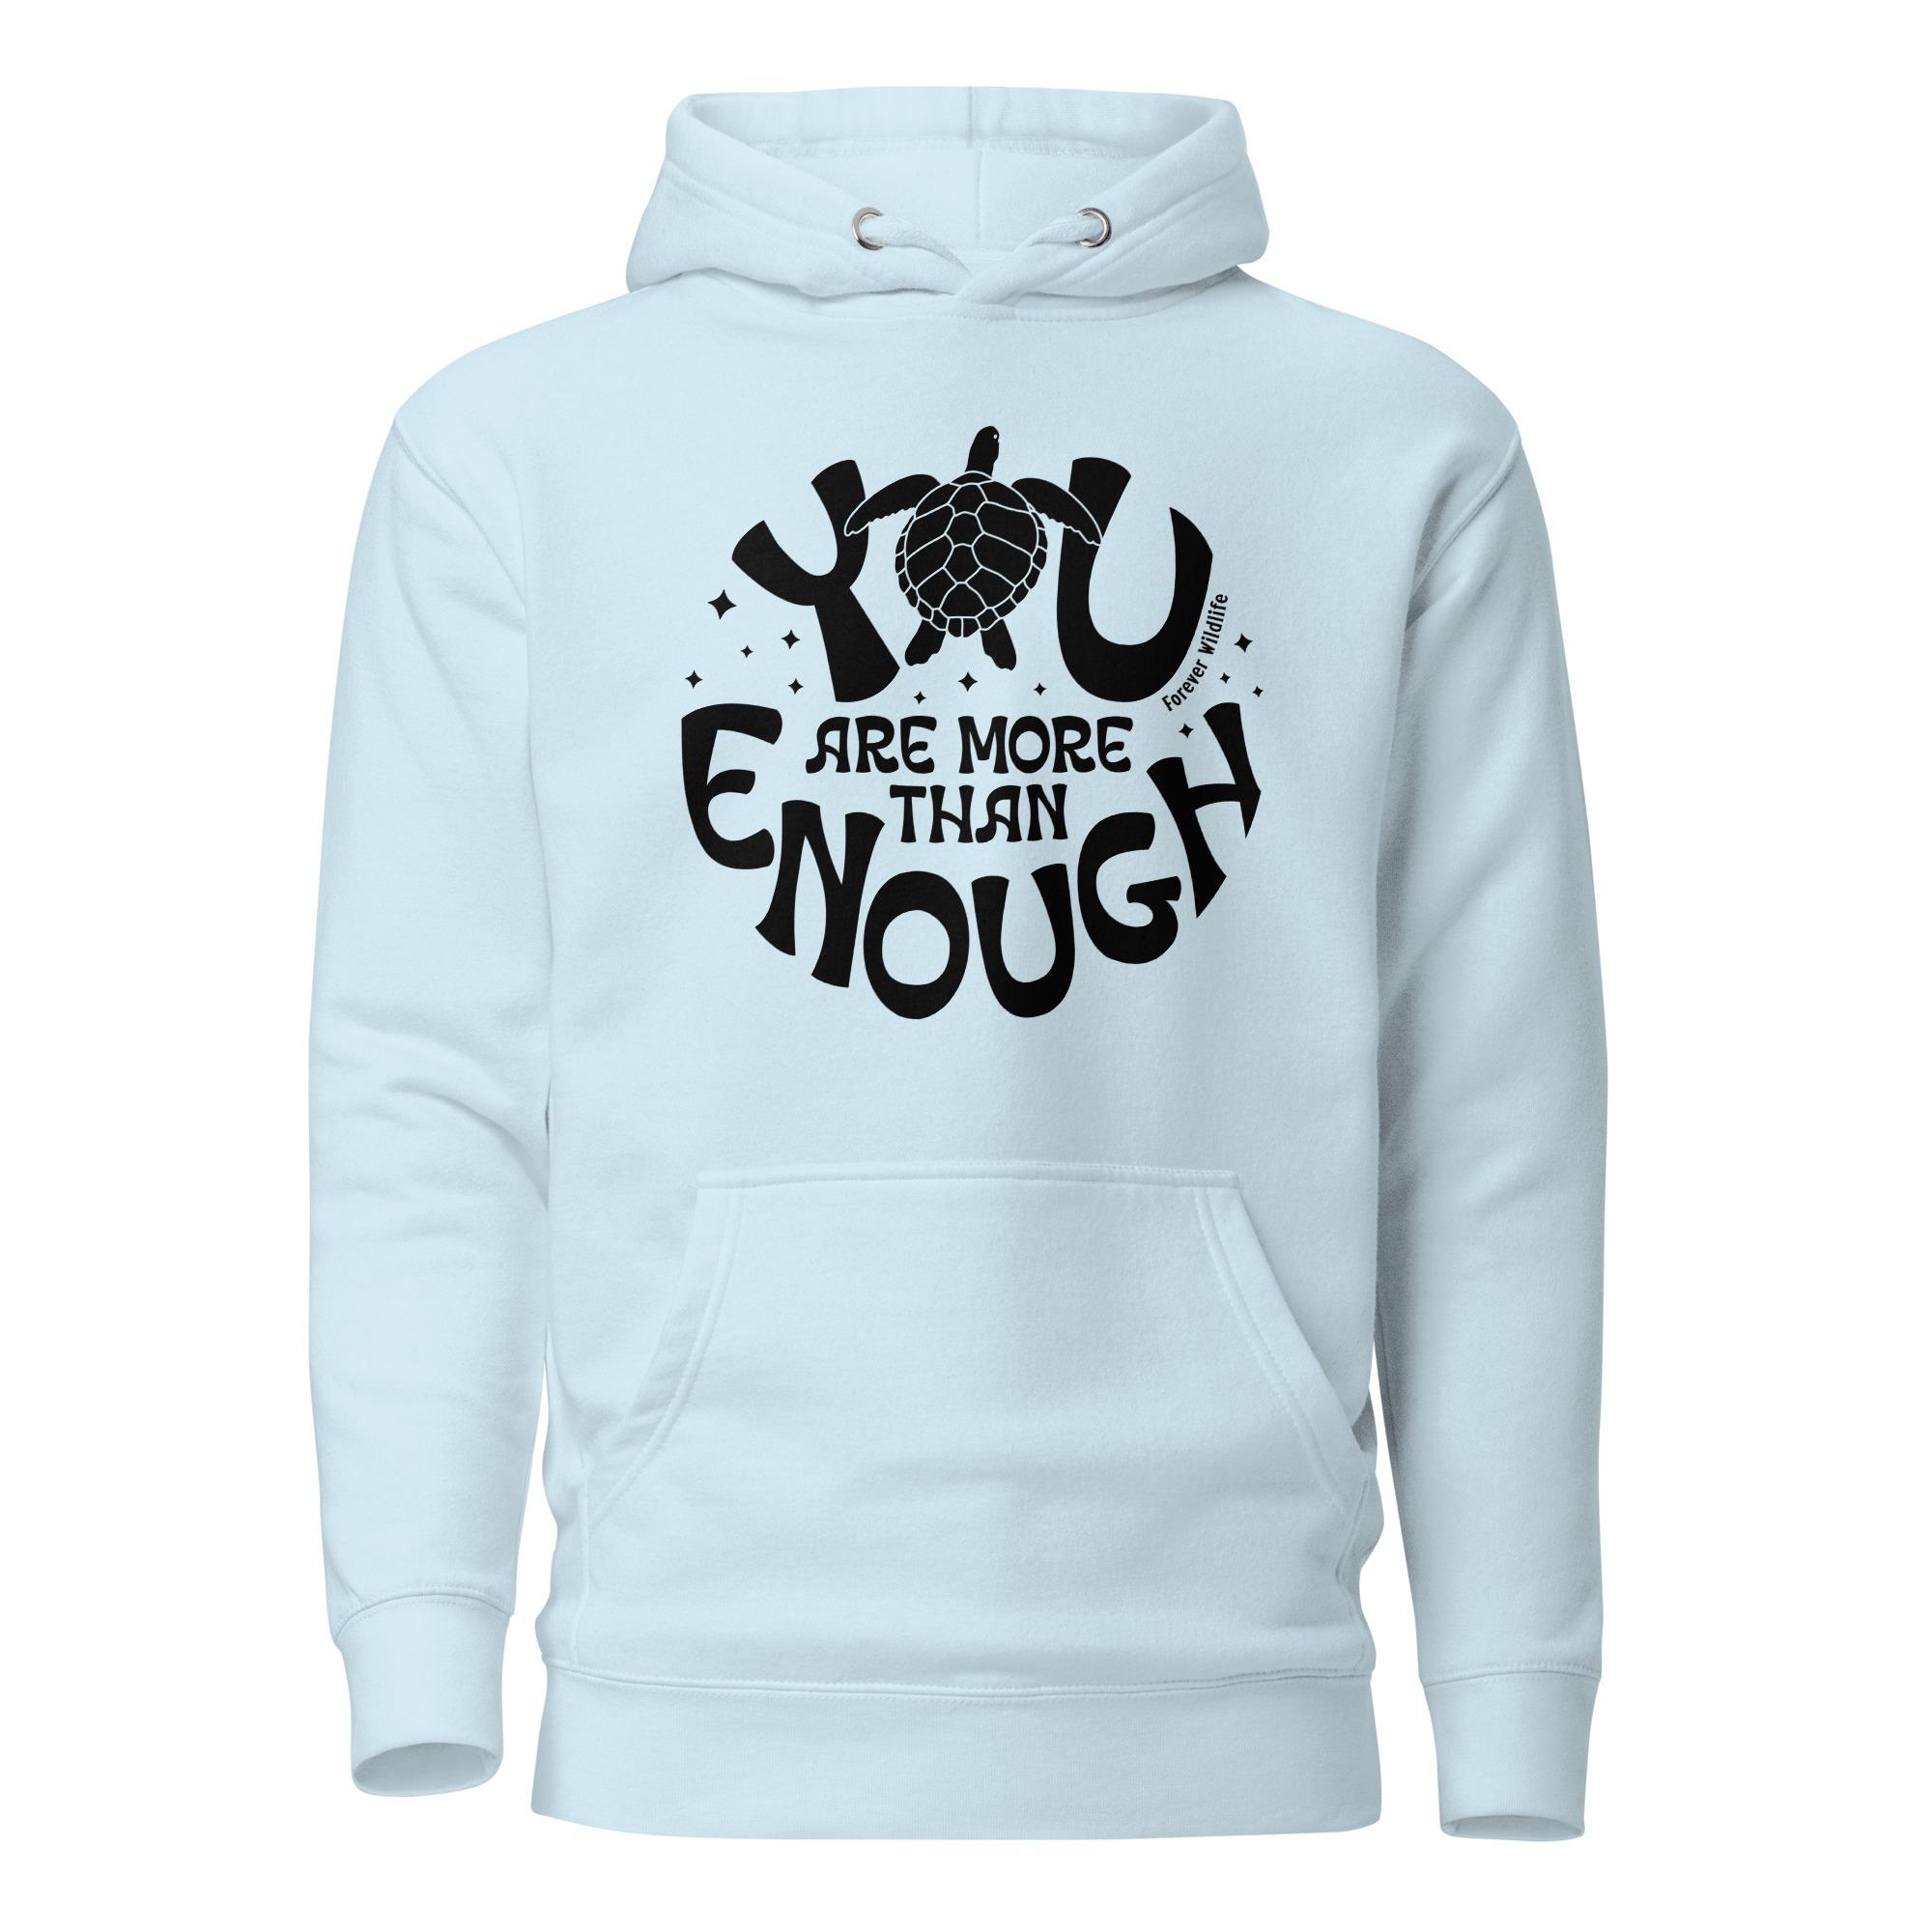 Sea Turtle Hoodie in Sky Blue – Premium Wildlife Animal Inspirational Hoodie Design with YOu Are More Than Enough text, part of Wildlife Hoodies & Clothing from Forever Wildlife